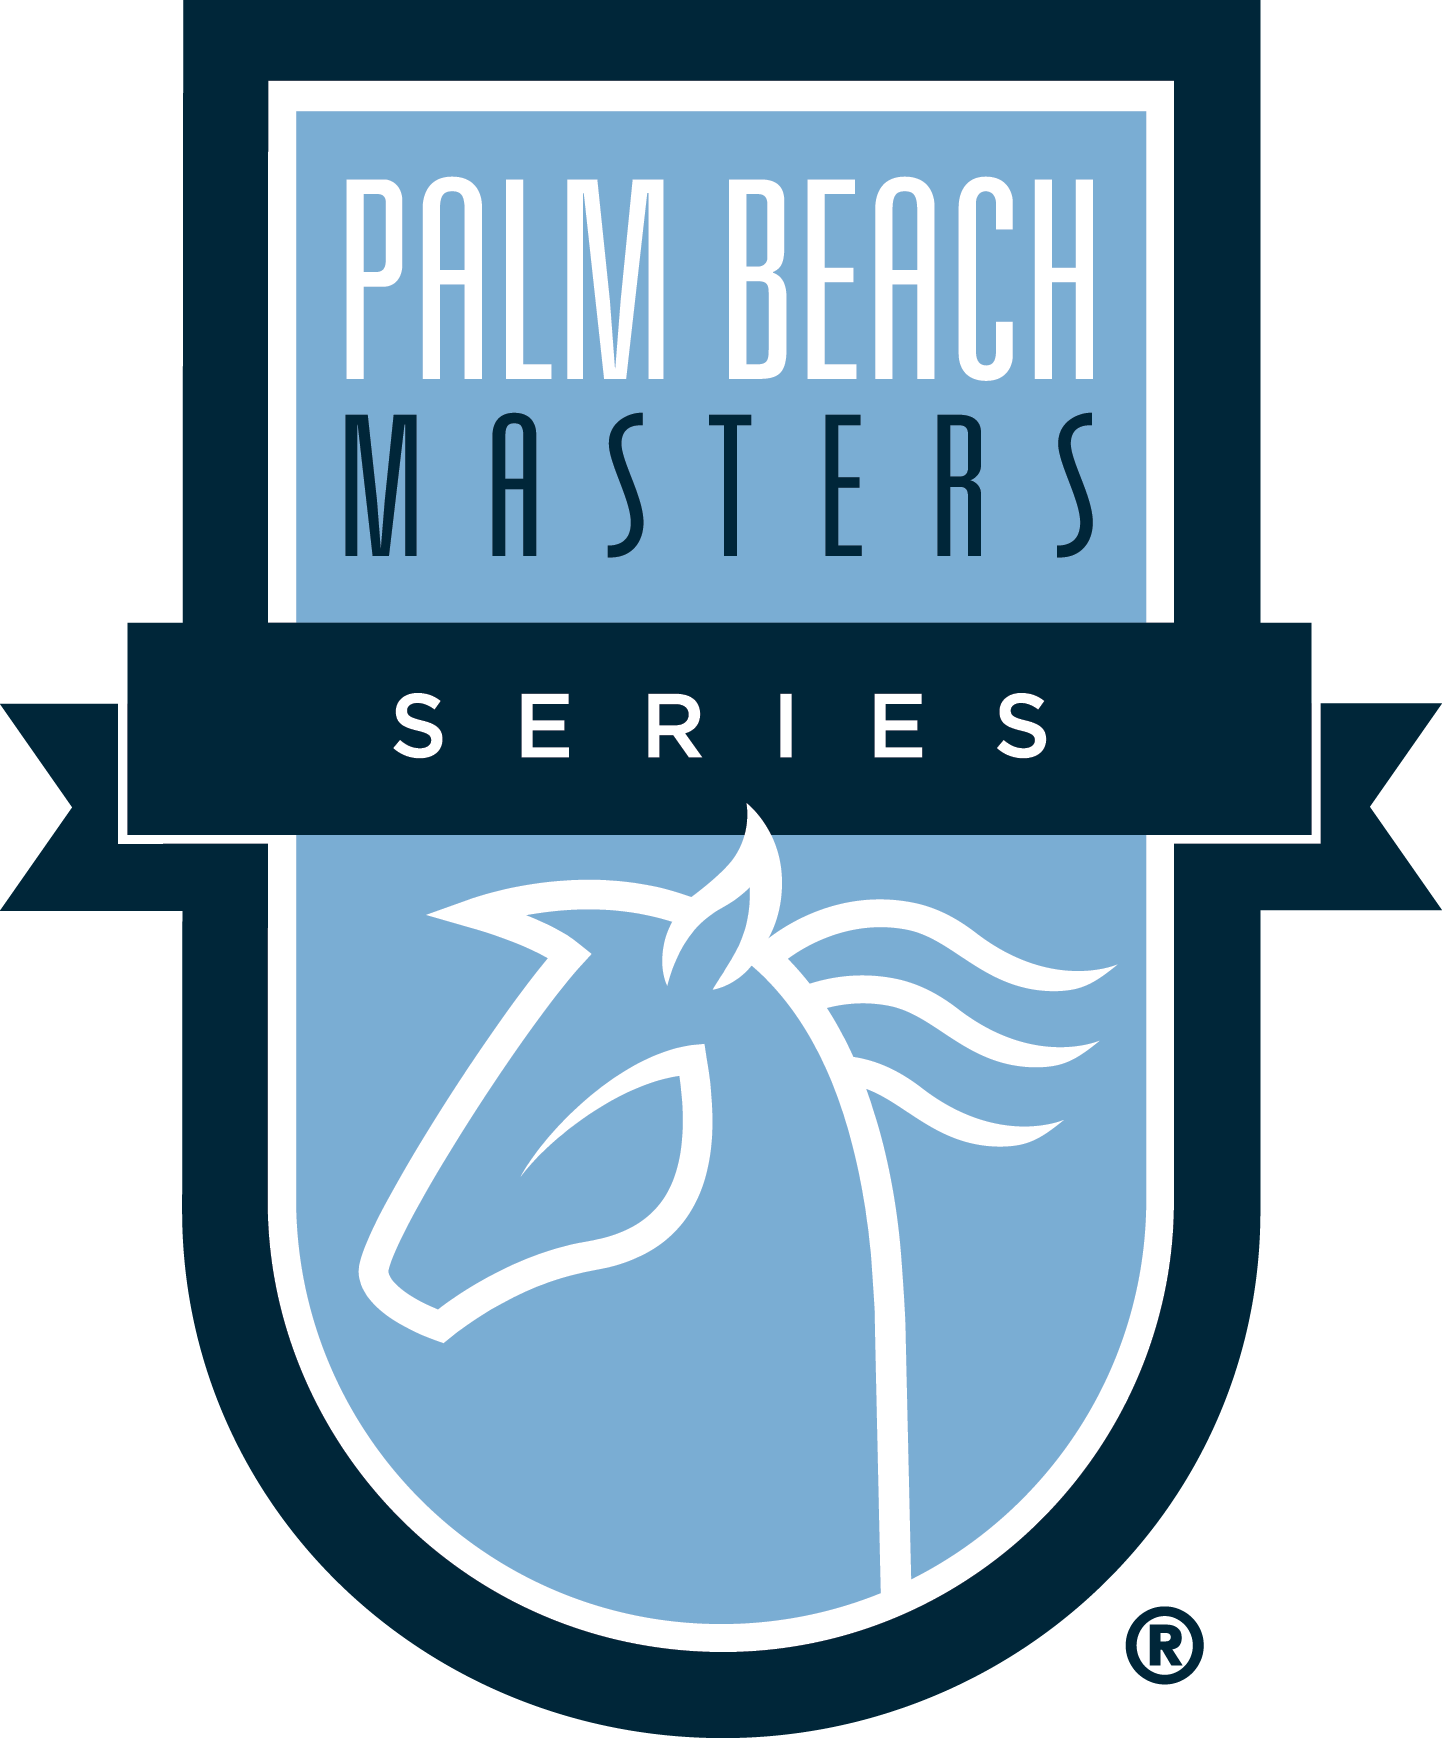 Fei Logo - Longines FEI Jumping Nations Cup - Palm Beach Masters Series